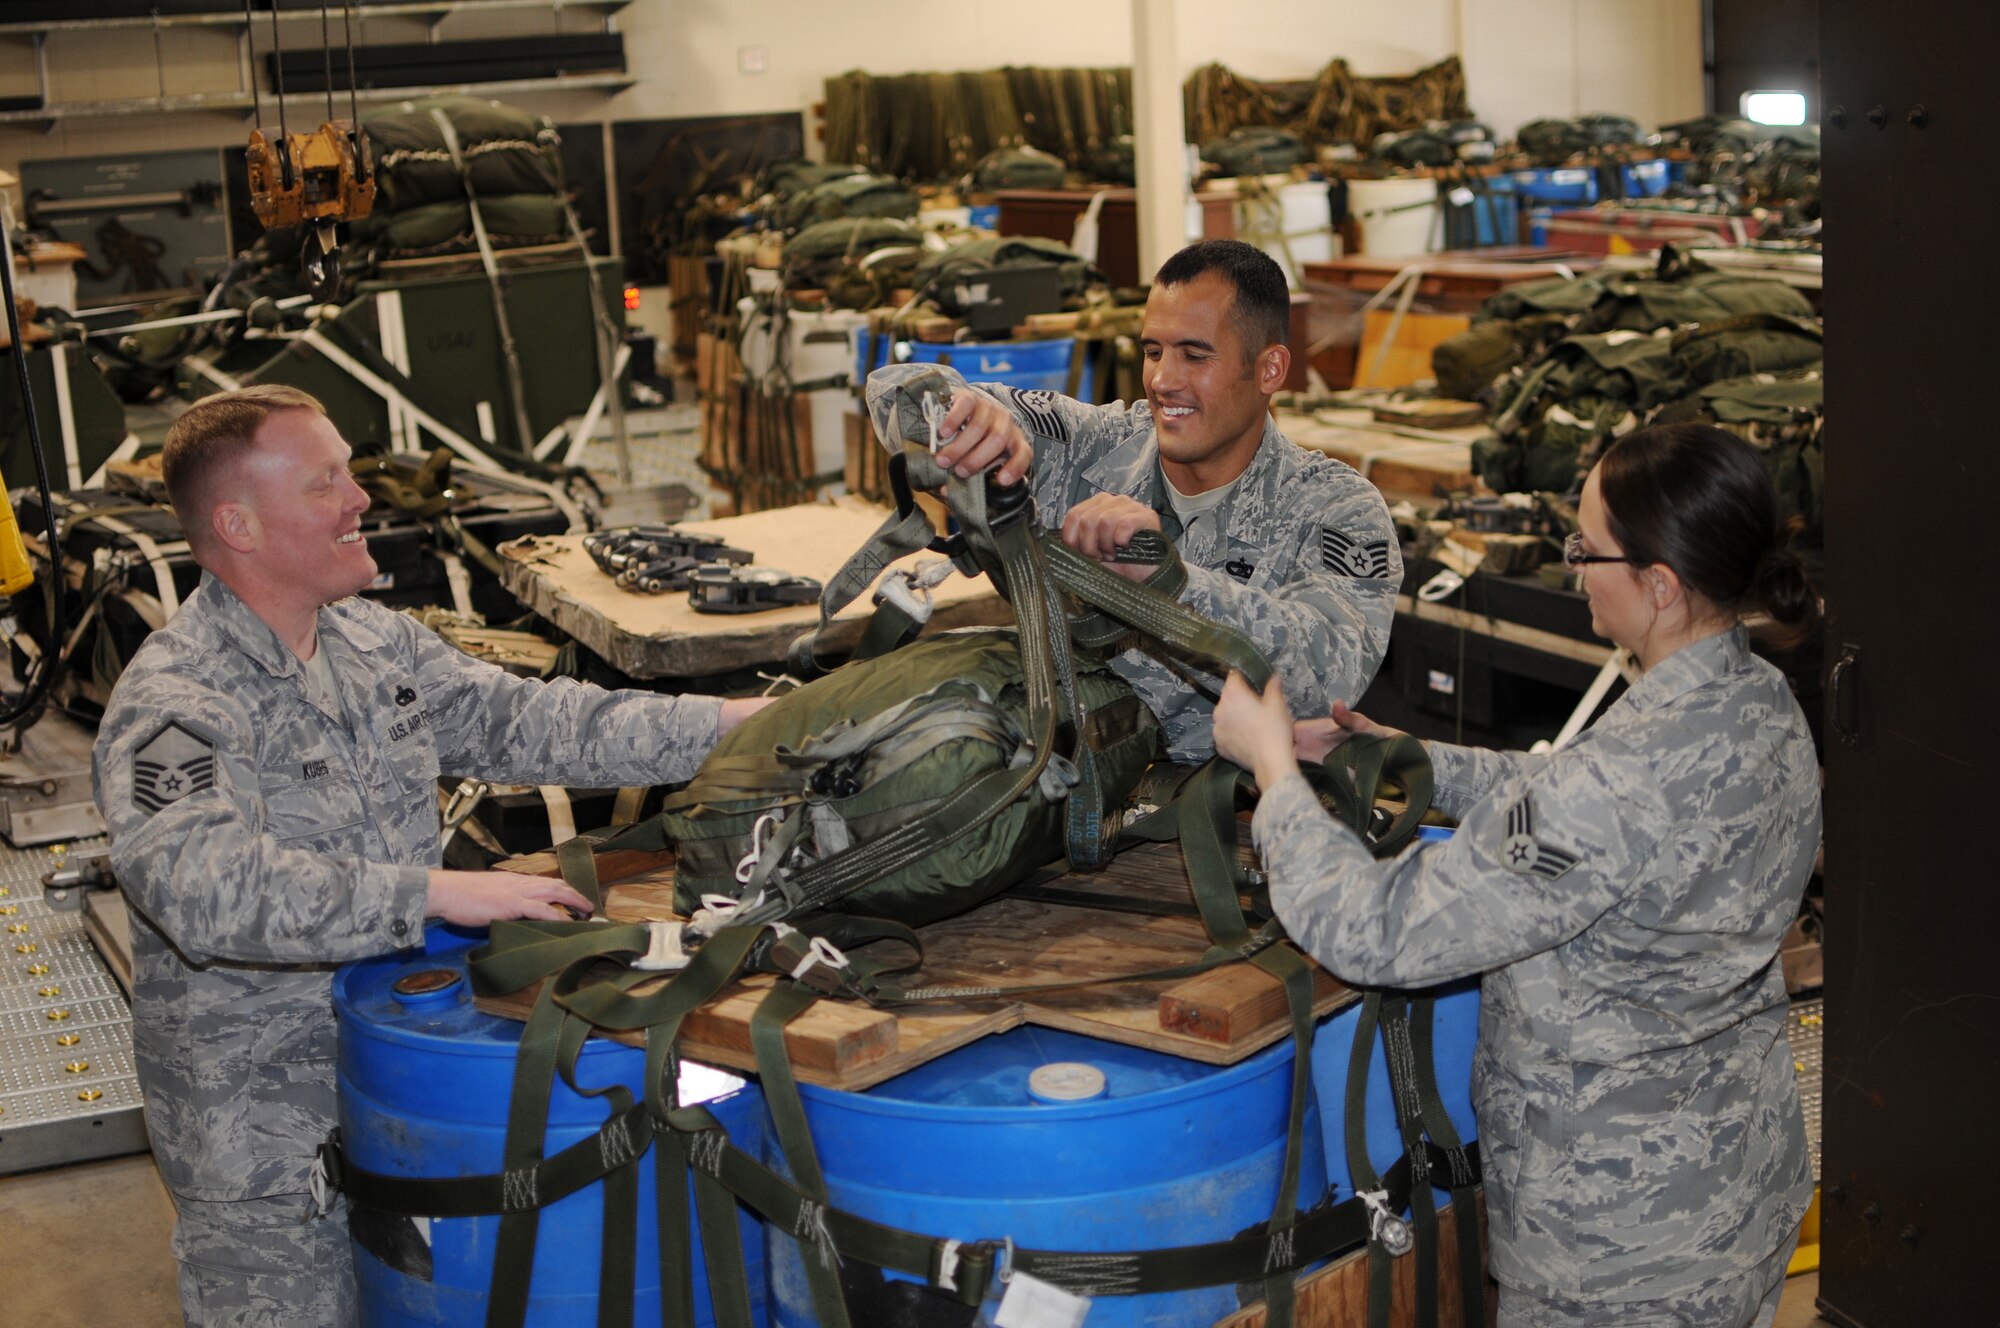 Master Sgt. John Kubes, superintendent of the small air terminal at the 133rd Logistics Readiness Squadron, (left) Tech. Sgt. Jacob Norsten, (center) and Senior Airman Kathryn Morrill, also of of the small air terminal, rig a pallet on Jan. 22, 2010 on the Air National Guard Base in St. Paul, Minn. Kubes has been selected to represent Minnesota as the Air Guard Outstanding Senior NCO, Norsten has been selected to represent Minnesota as the Air Guard Outstanding NCO and Morrill has been selected to represent Minnesota as the Air Guard Outstanding Airman for 2011. USAF official photo by Tech. Sgt. John Wiggins